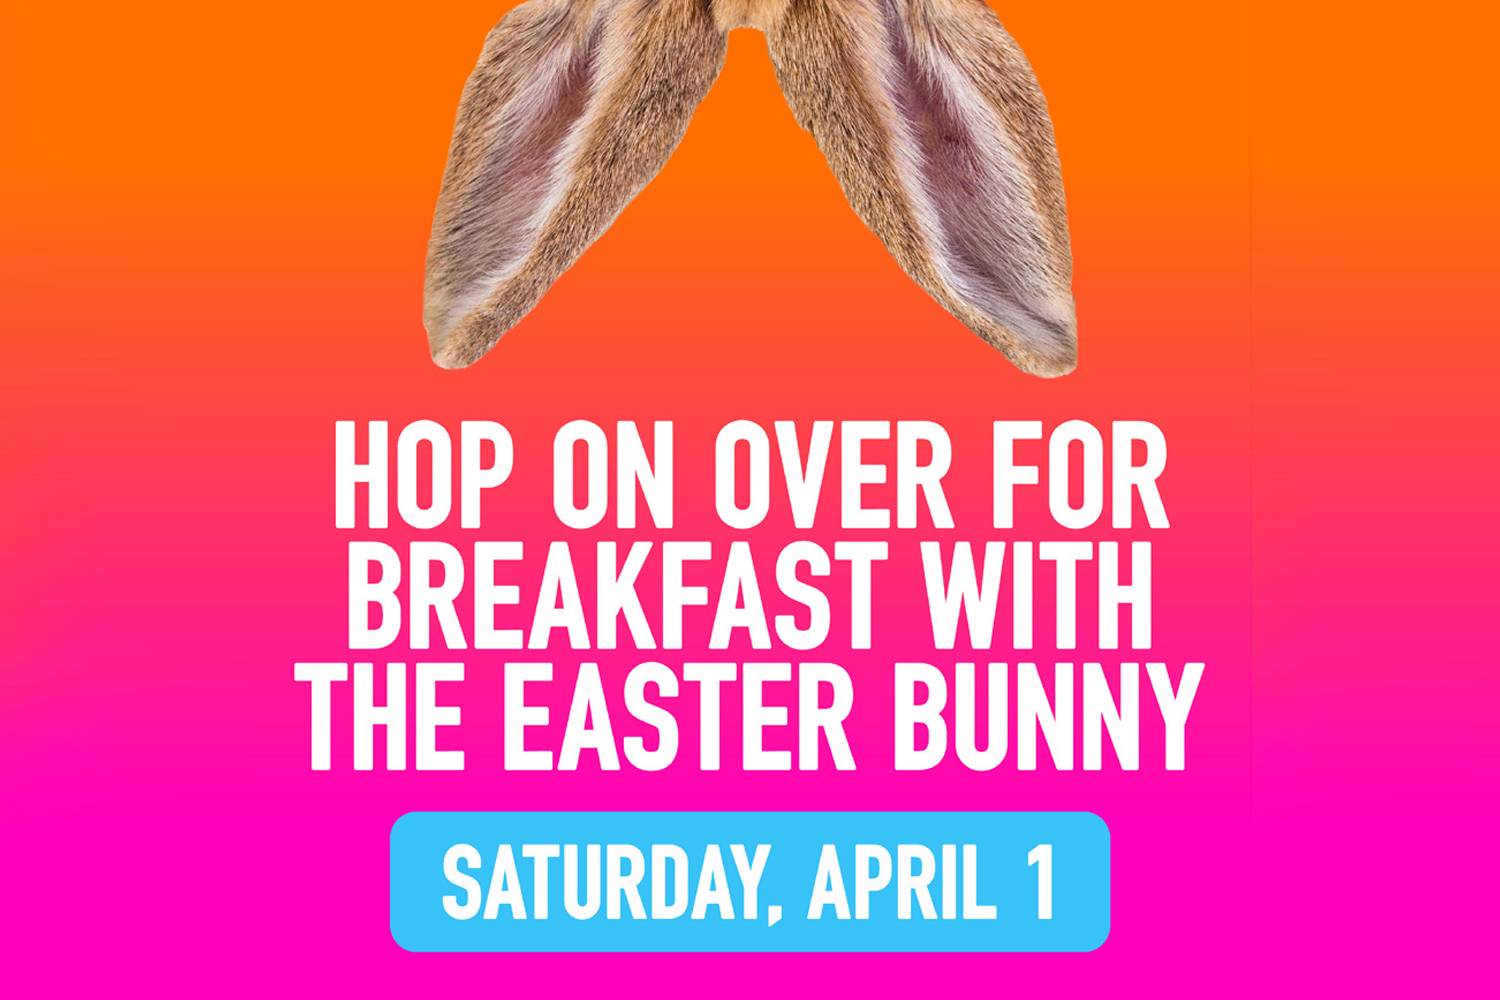 Hop On Over For Breakfast with The Easter Bunny